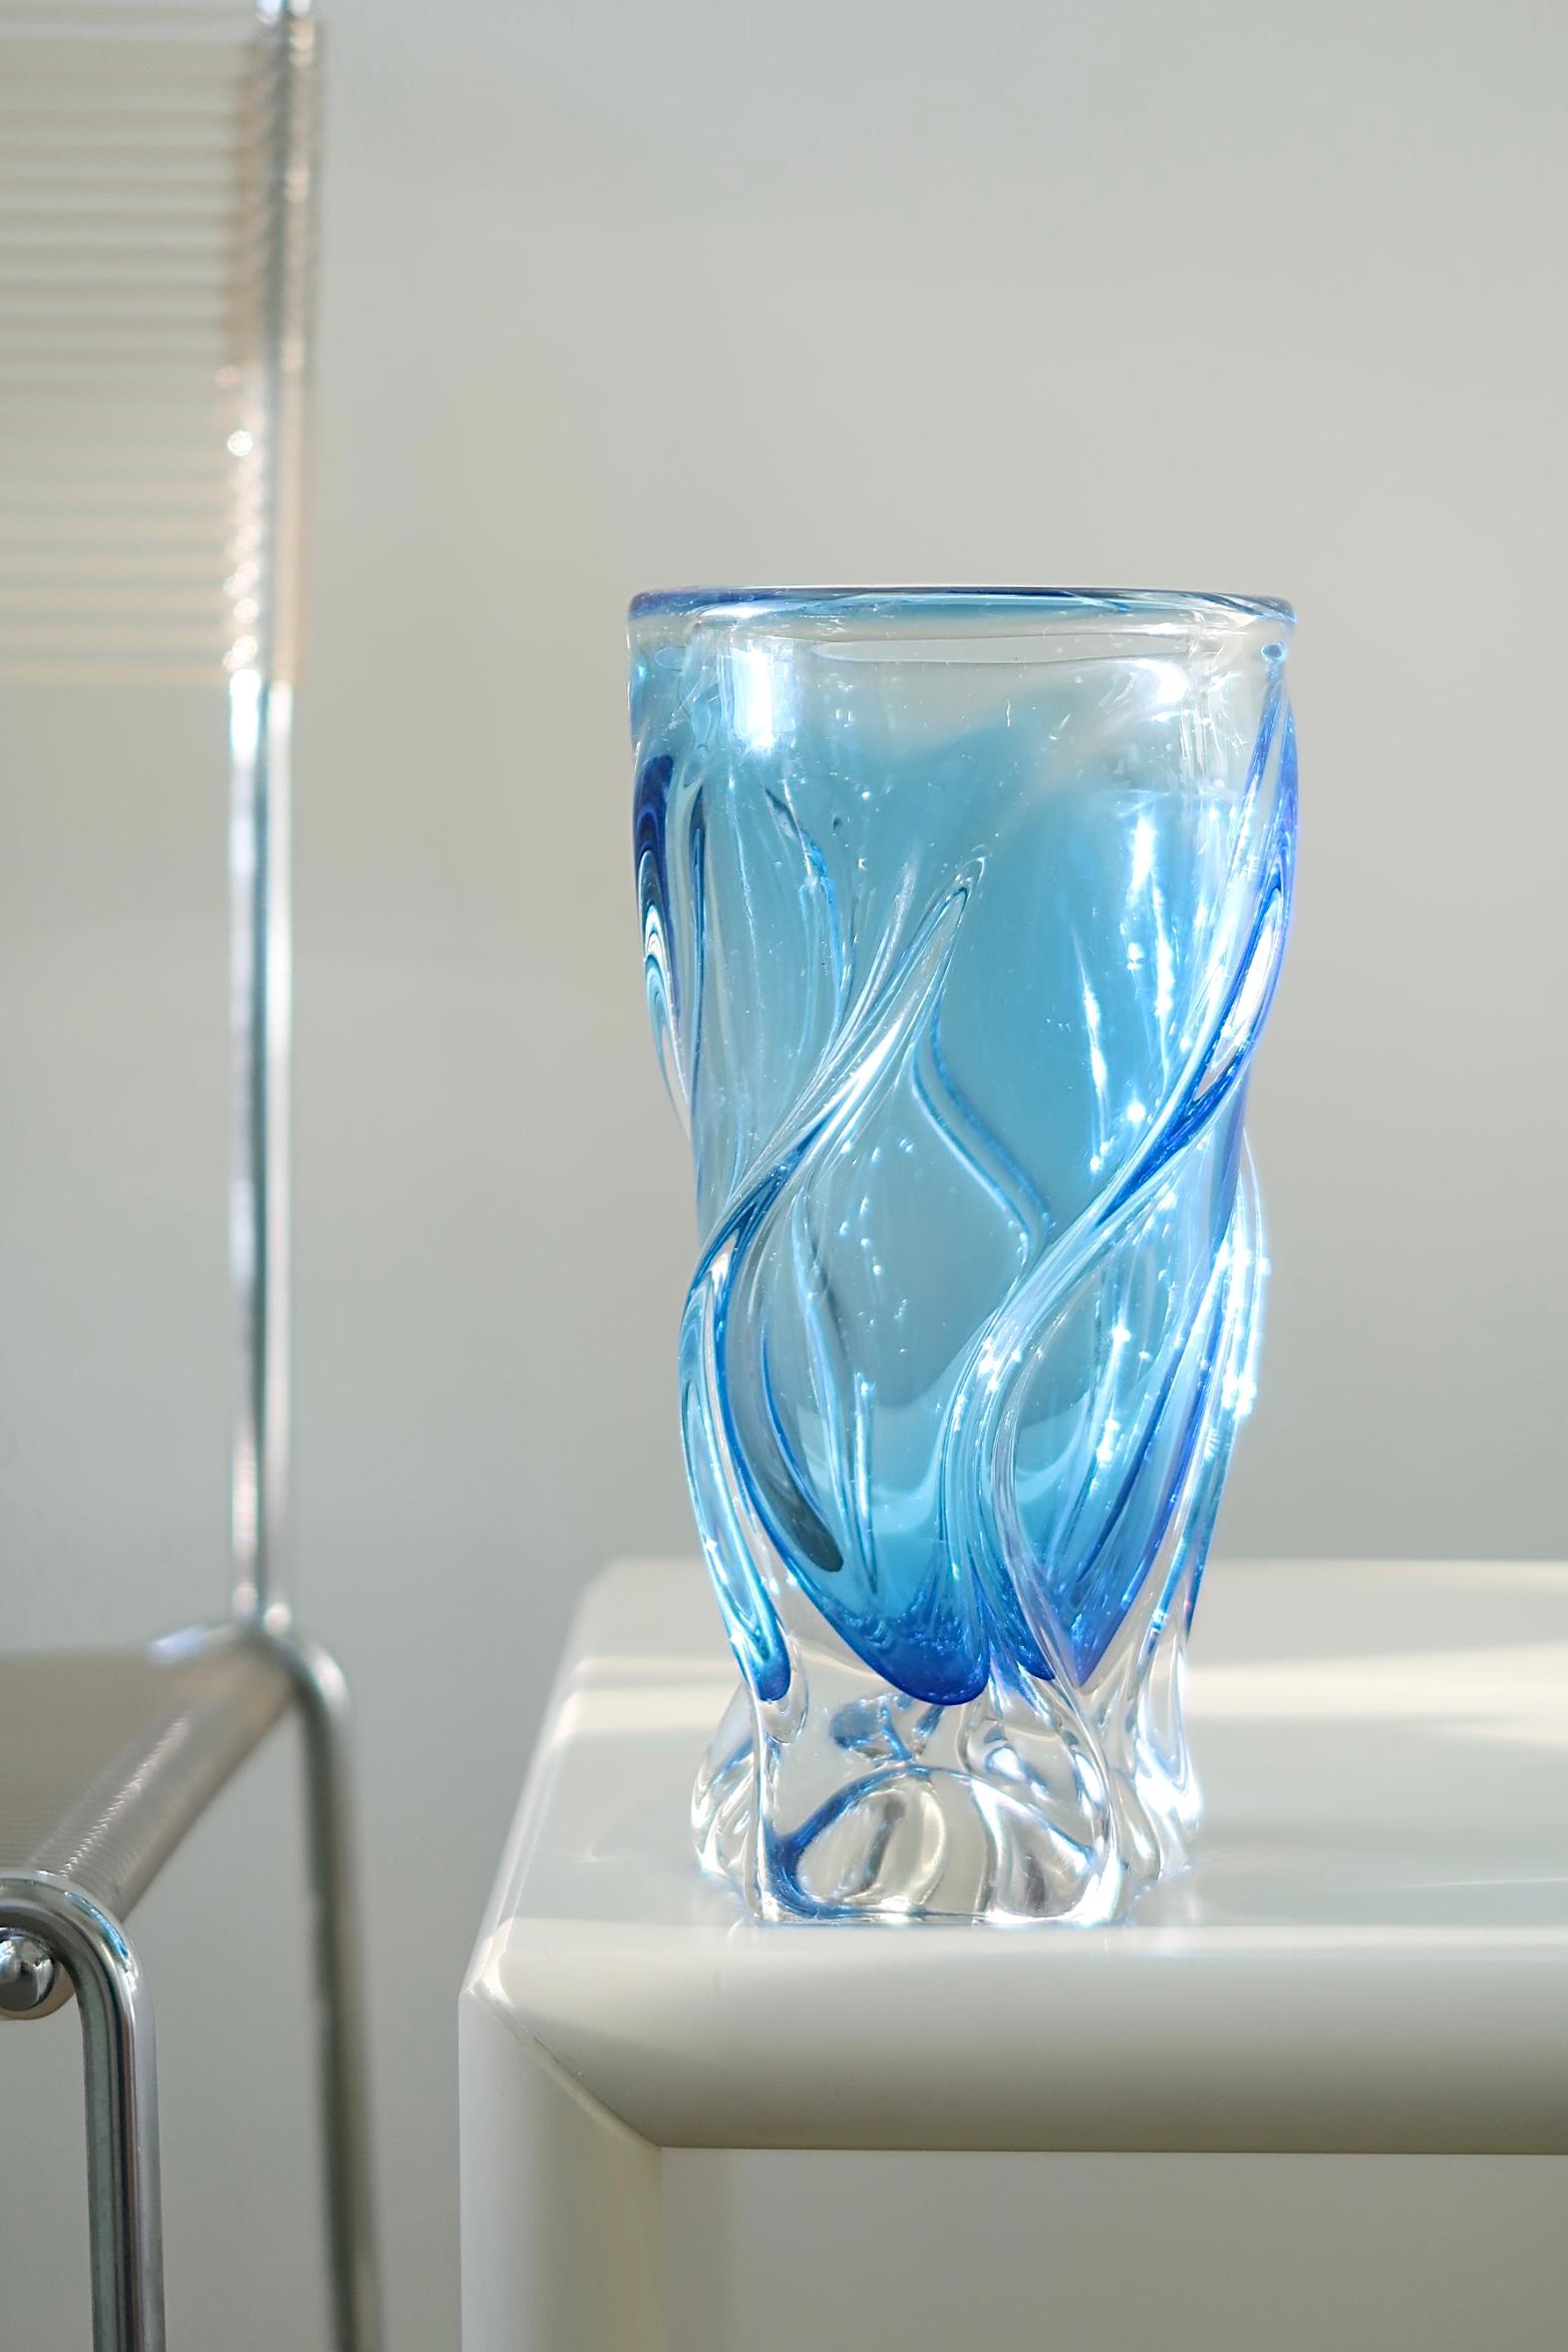 Vintage Murano glass vase in shades of blue. The vase is mouth-blown glass with a swirl pattern. A beautiful sculpture. Handmade in Italy, 1970s.

Measures: H:20 cm D:10 cm??

.